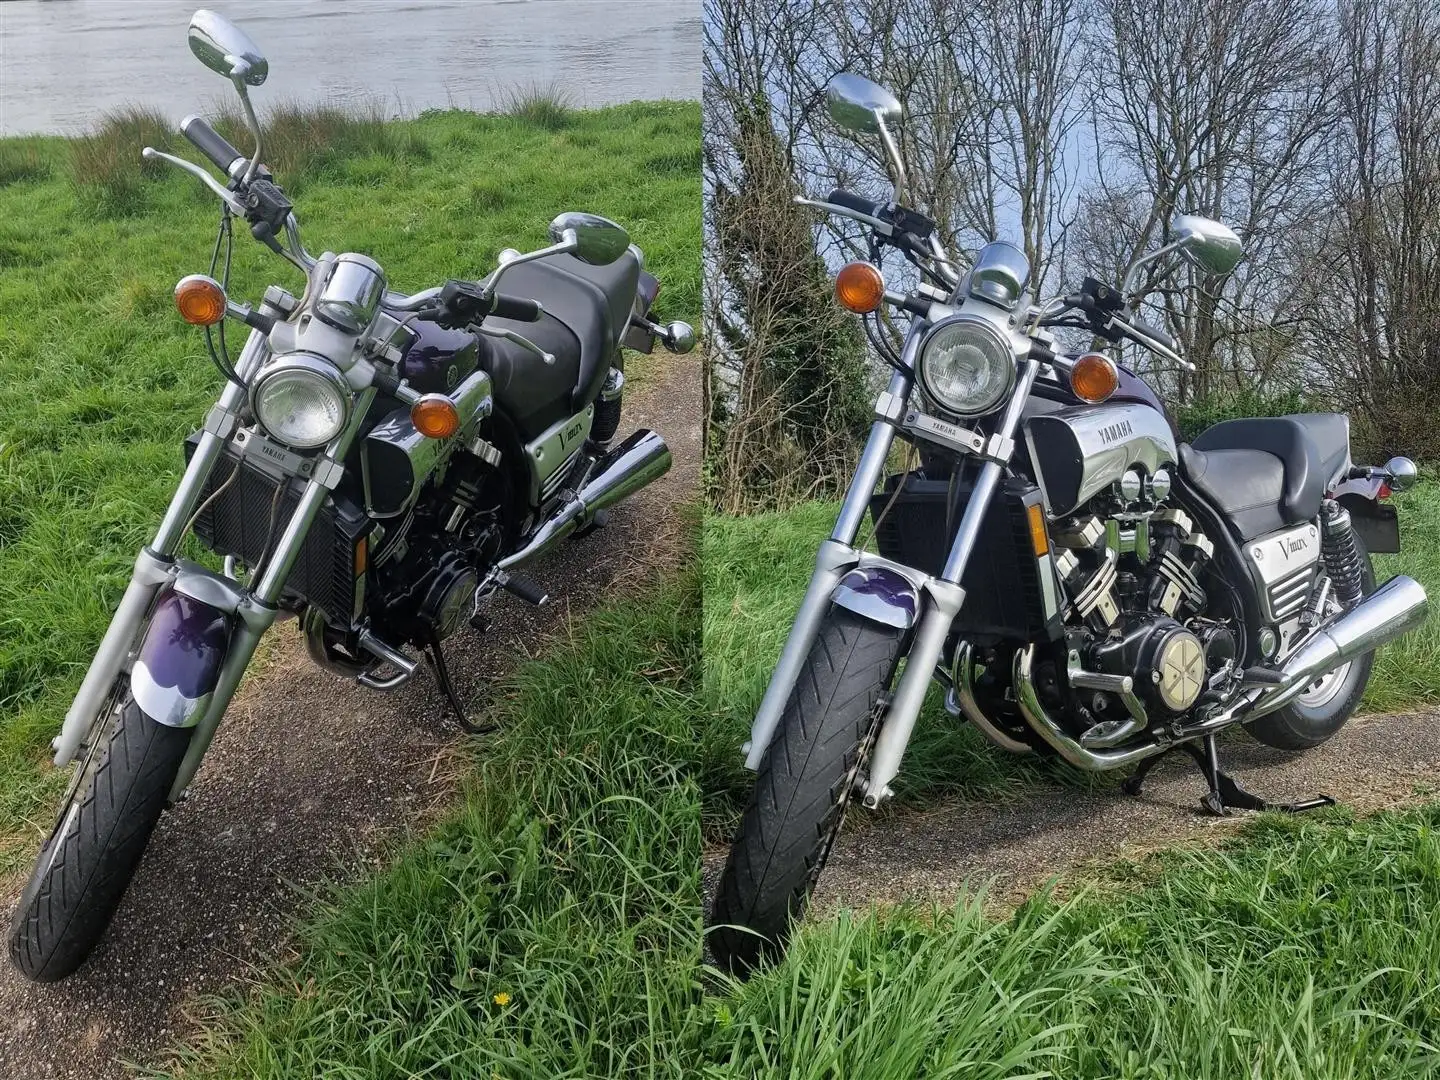 Yamaha Vmax 1200 cc in nette staat Fioletowy - 2